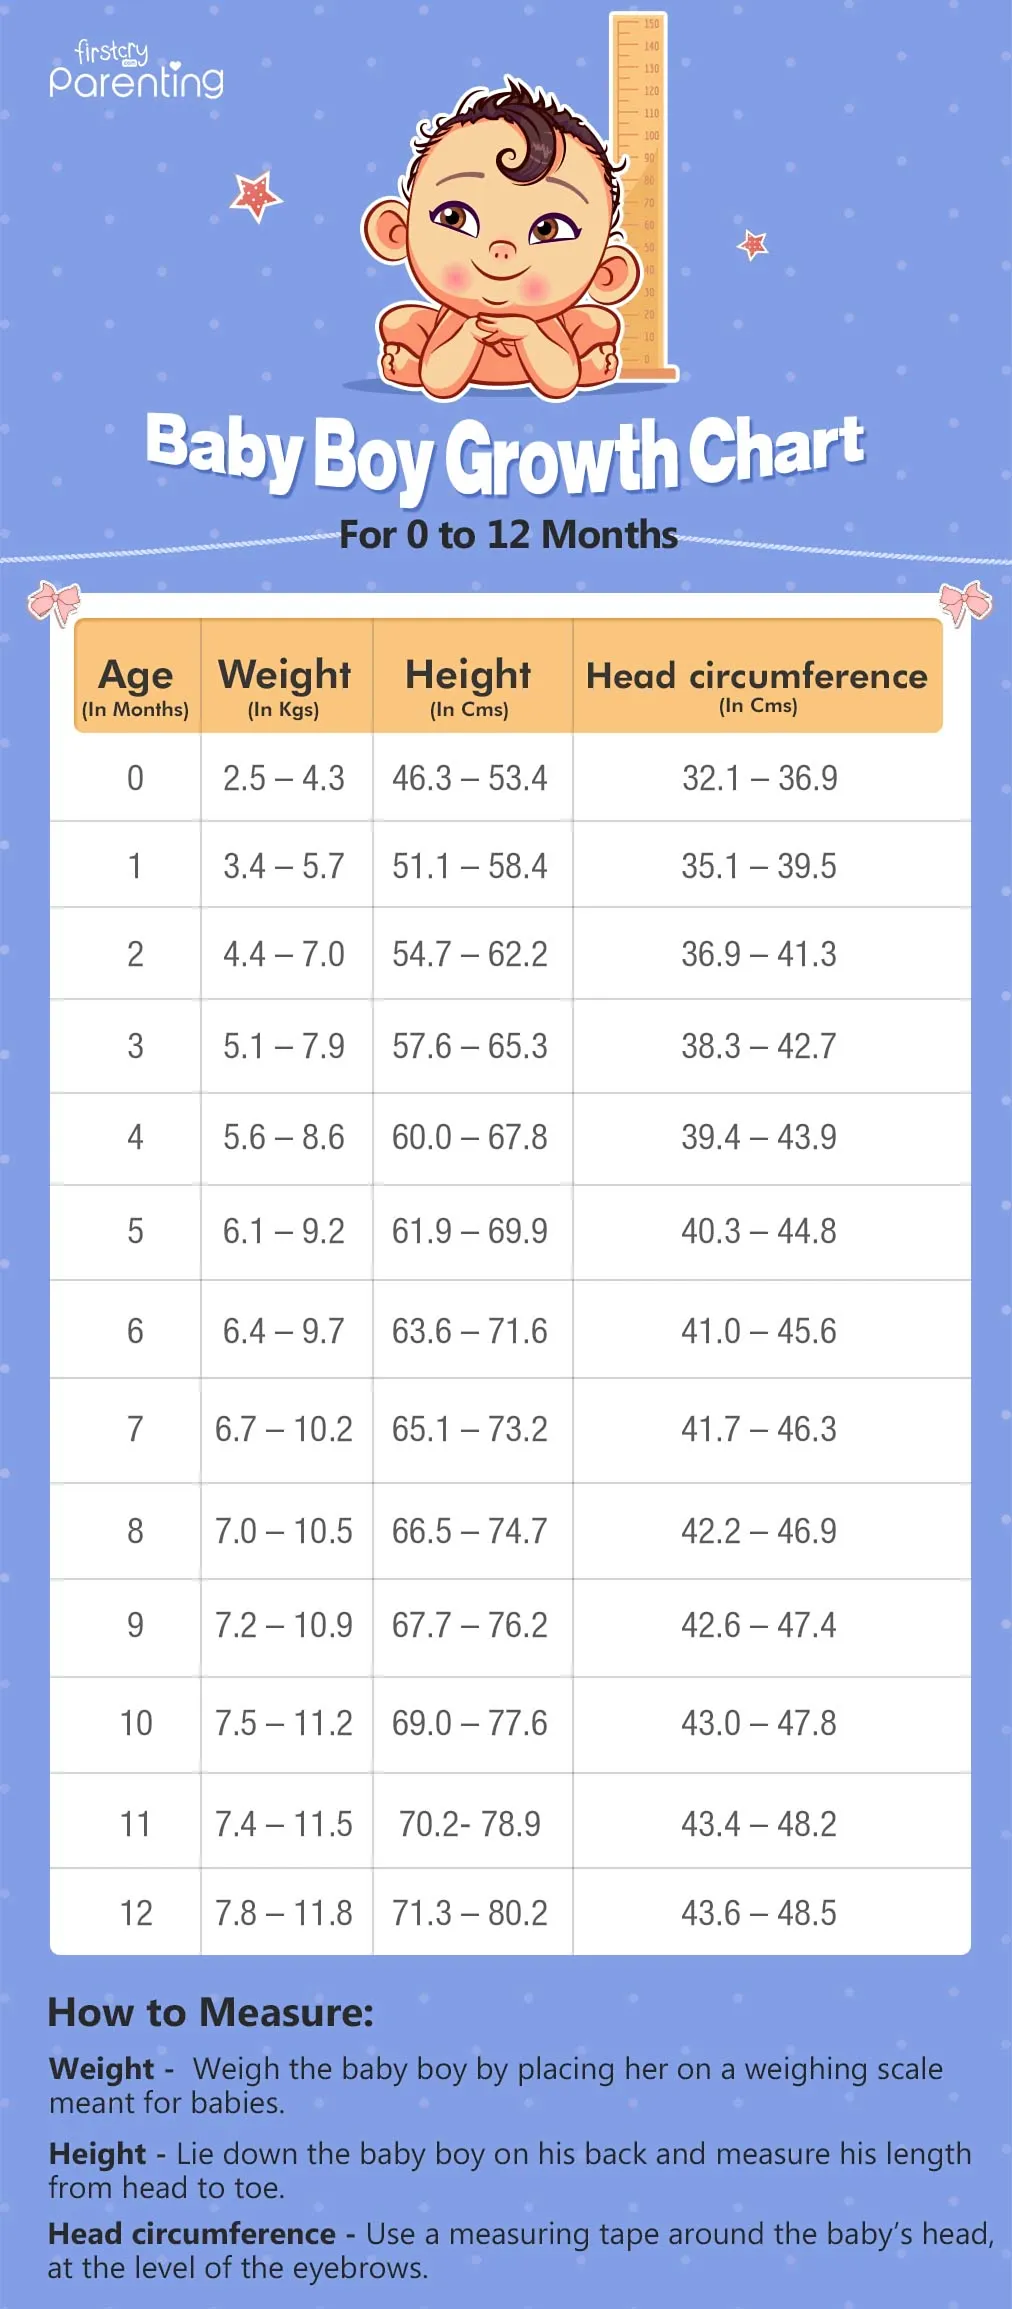 Baby Boy Growth Chart For 0-12 months